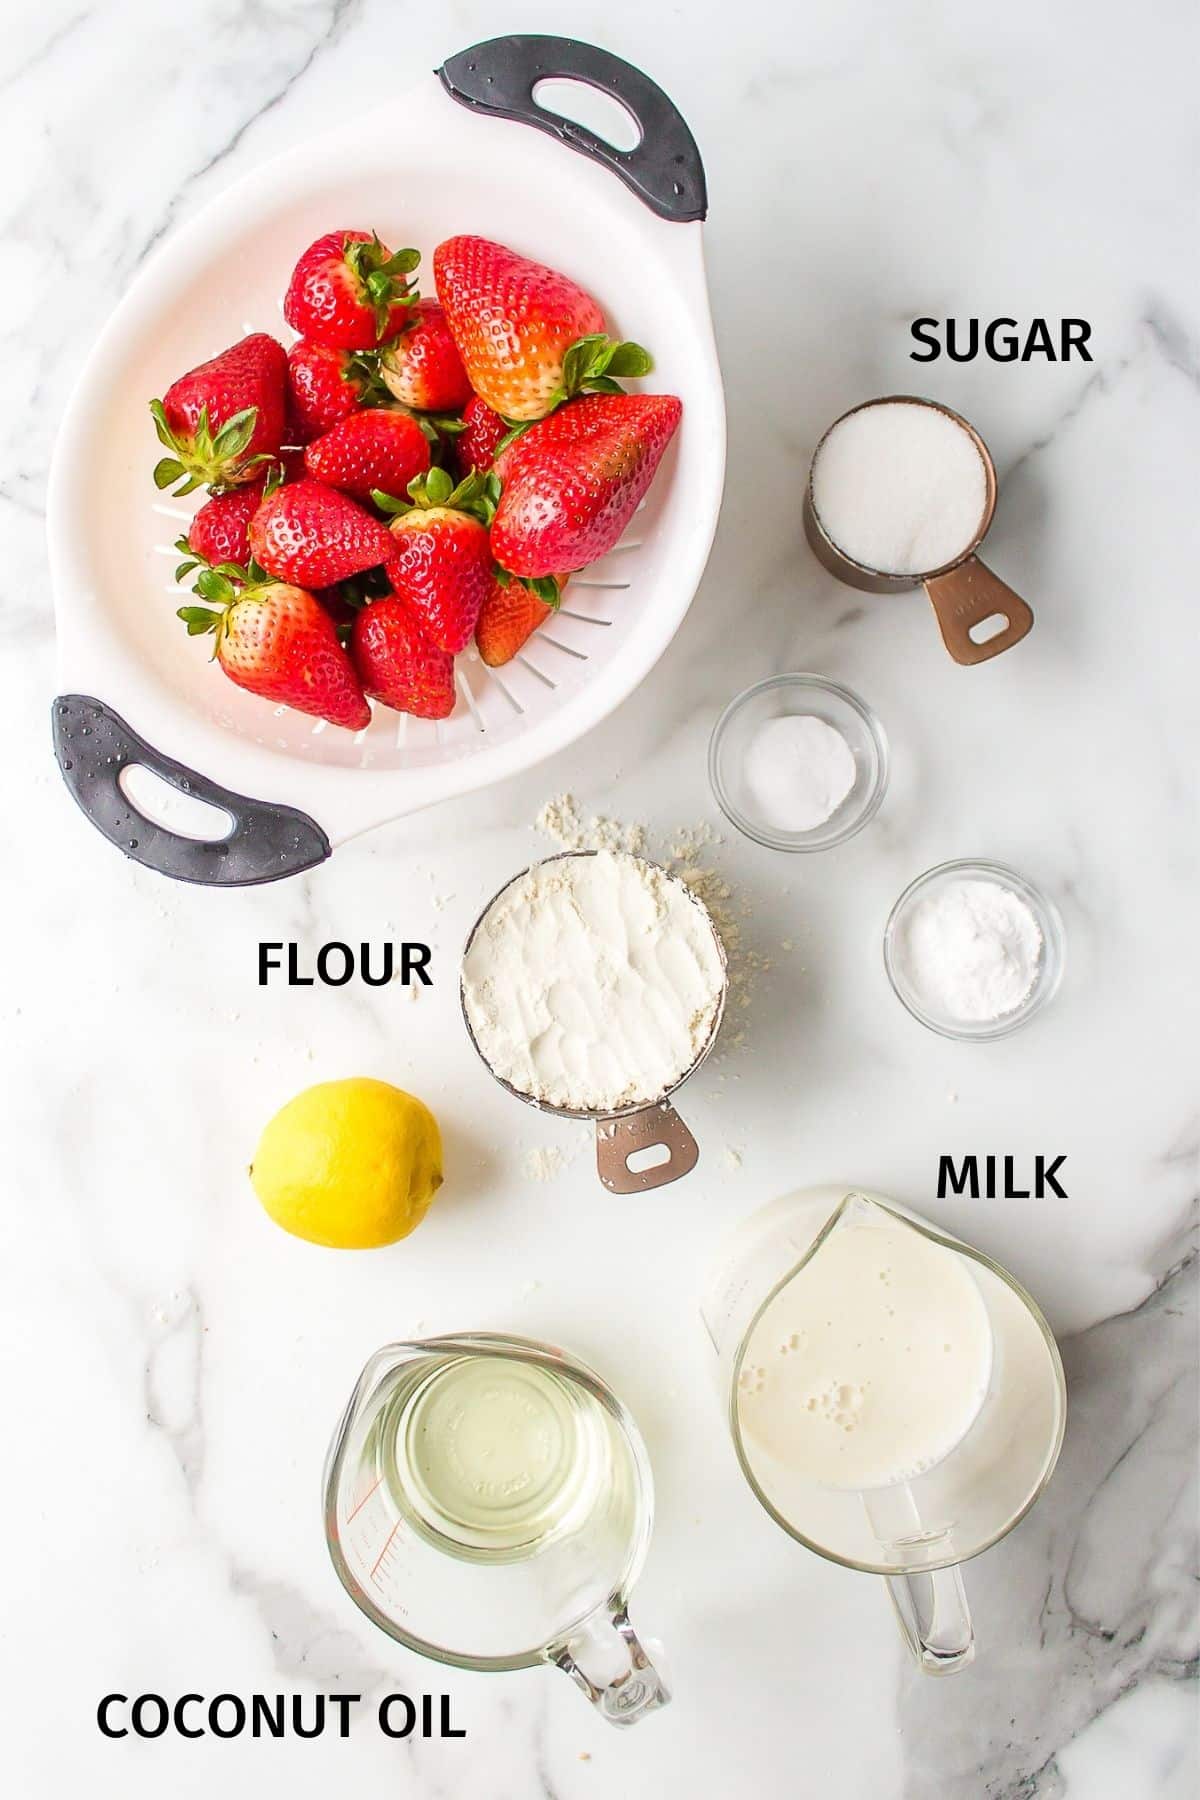 Ingredients for strawberry muffins in small bowls on a white surface.